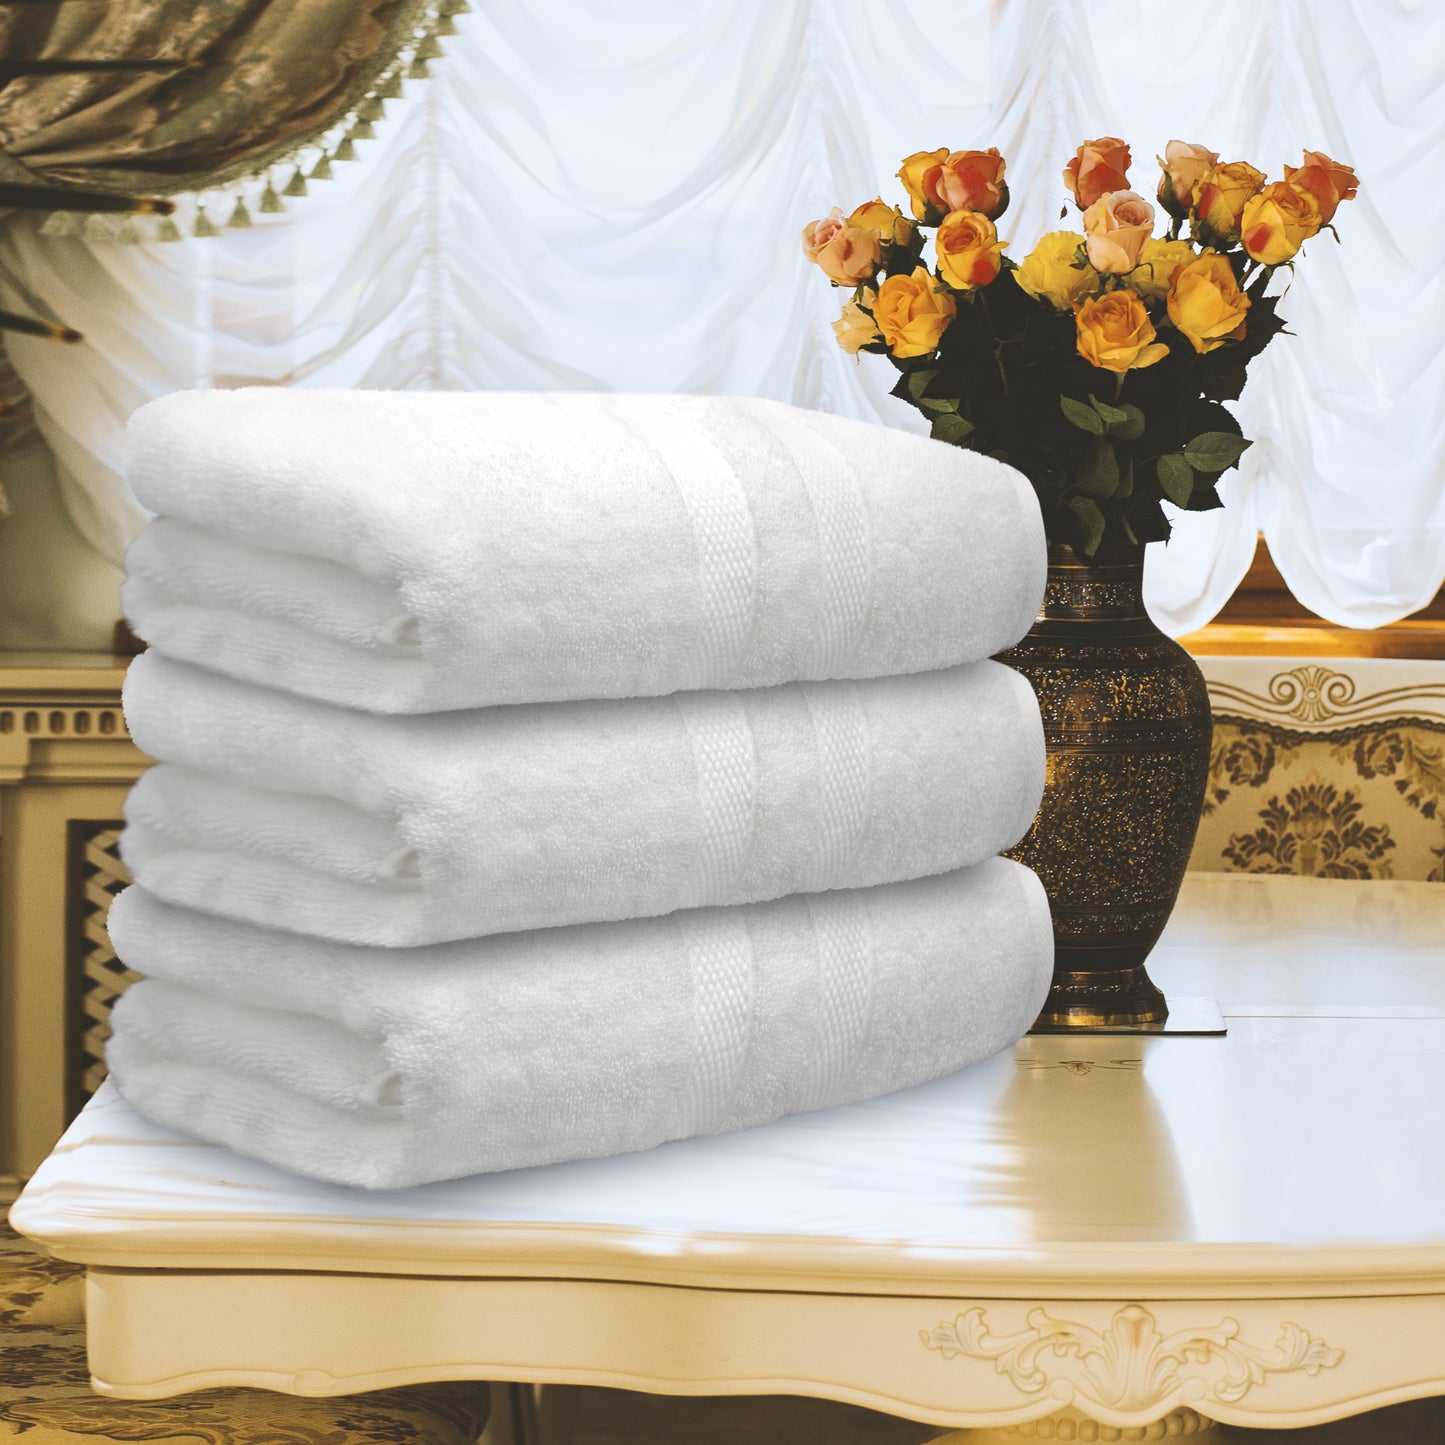 Turkwell Luxury Bath Towels Set, 100% Combed Cotton, 27x54 in, White Bath Towel Set of 3